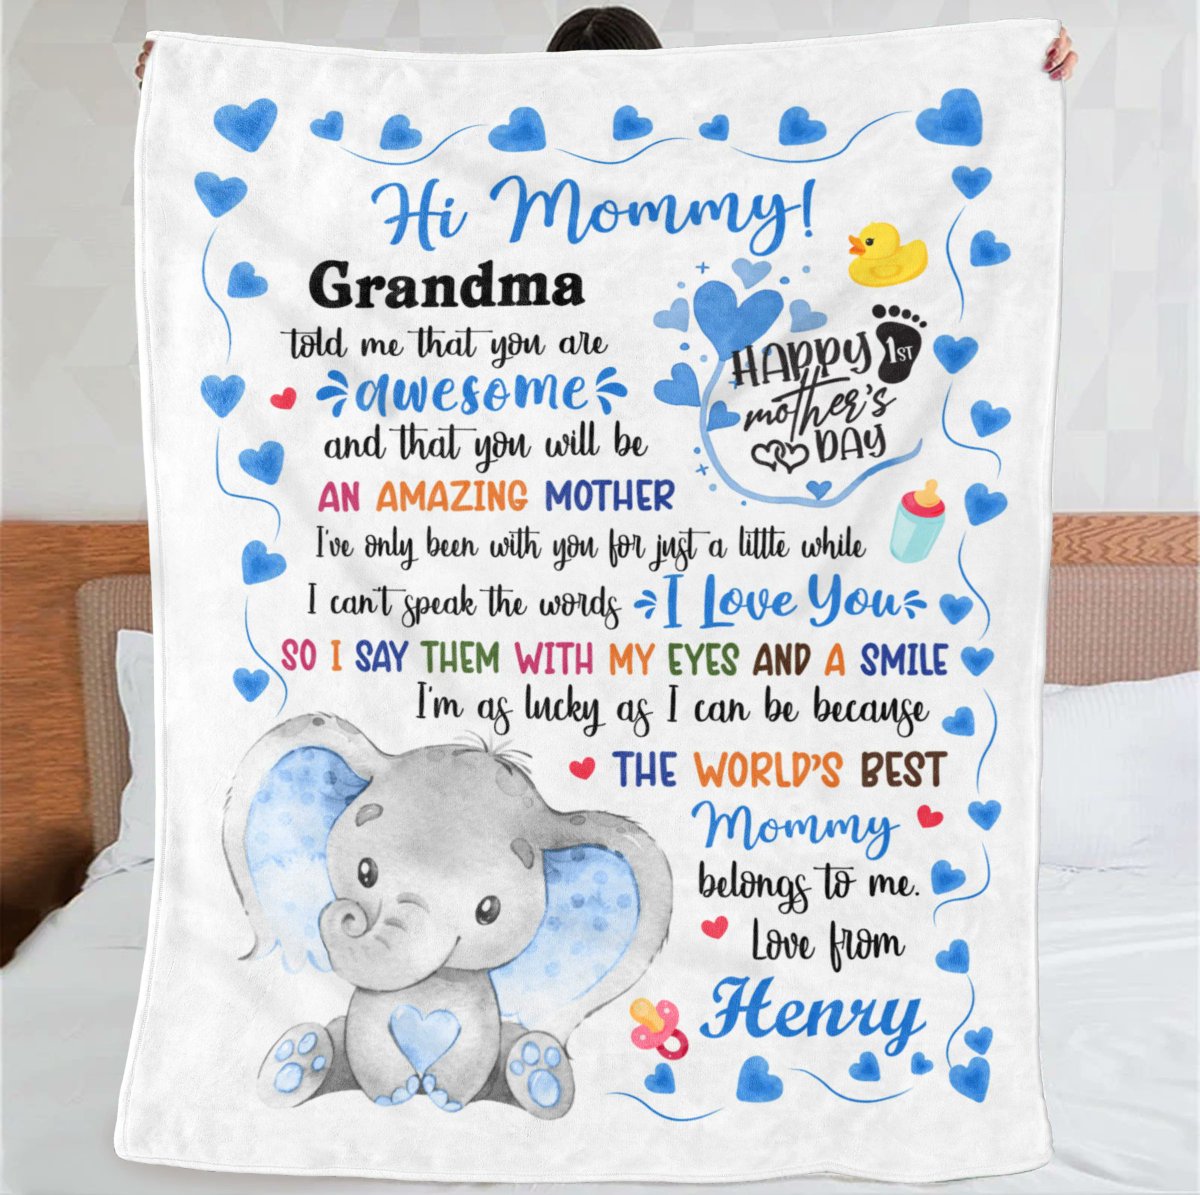 One of your loved ones is going to be a first-time mom? Let's celebrate the meaningful moment on their first Mother's Day in a new chapter of life!!! 🎁 Shop now => g2.by/VR7t #mothersday #mothersdaygifts #MothersDay2023 #funnygifts #giftsformom #moms #gift #newmom